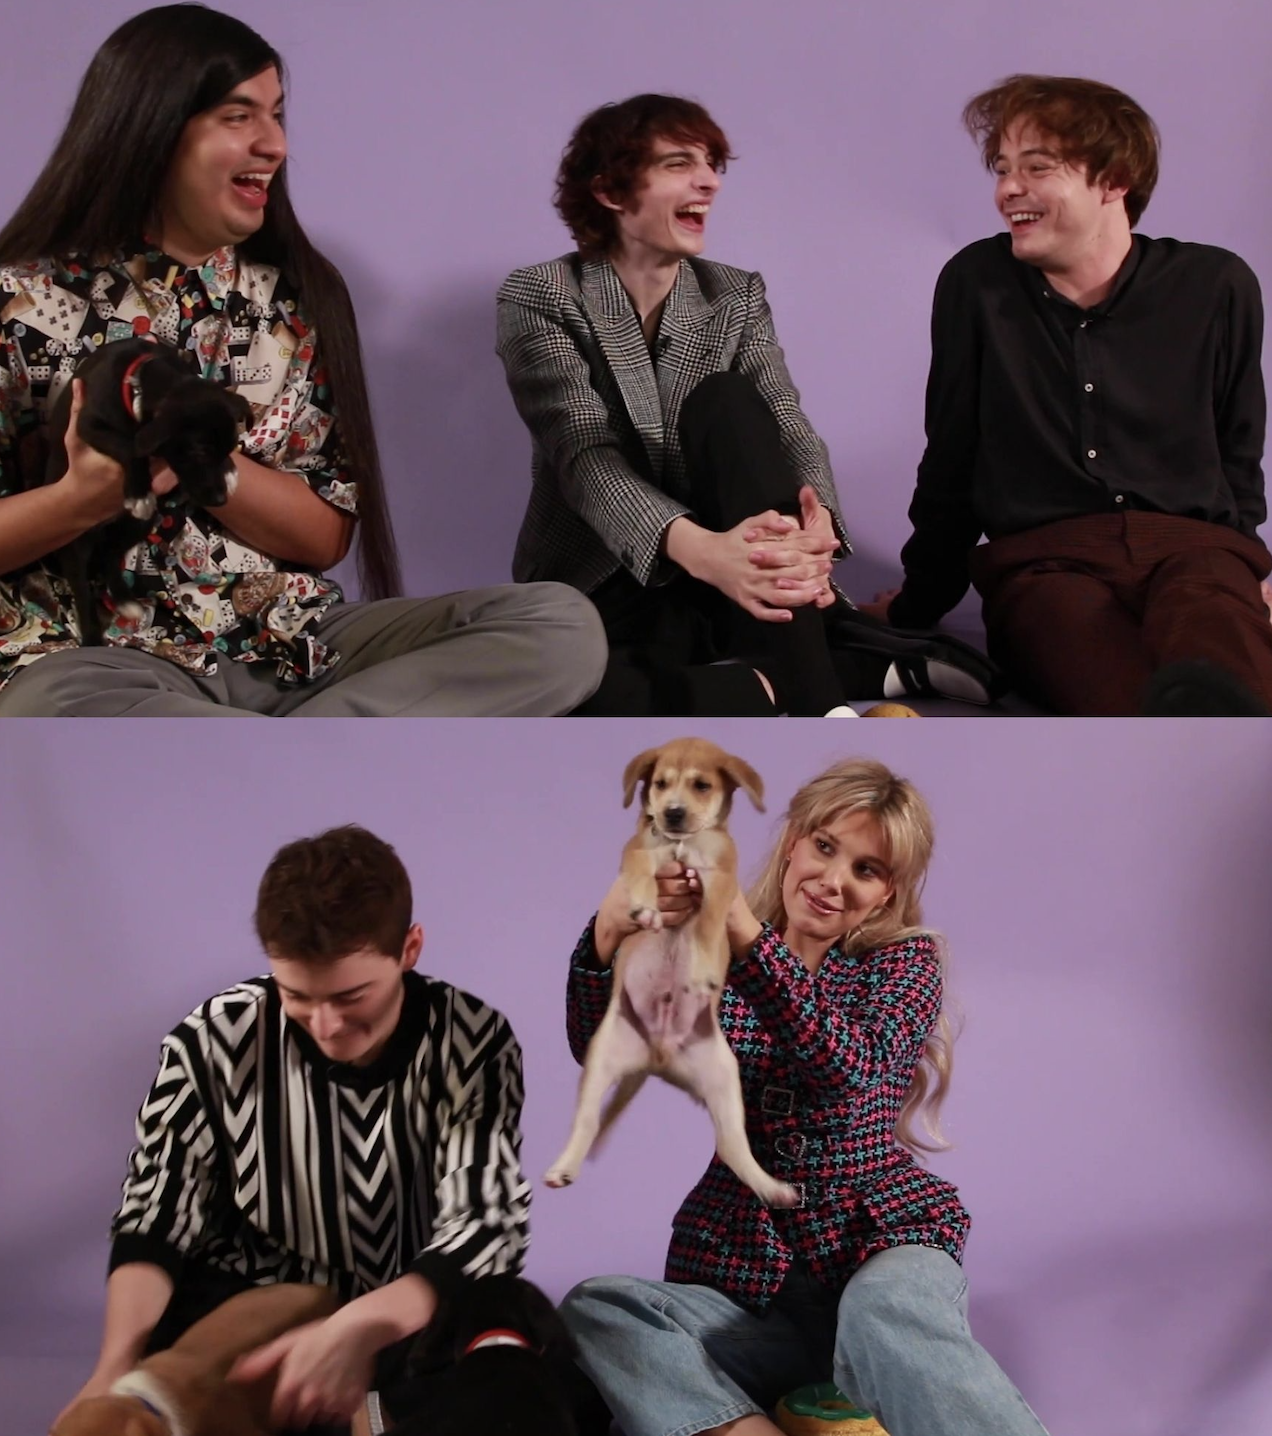 The cast members holding puppies up to the camera